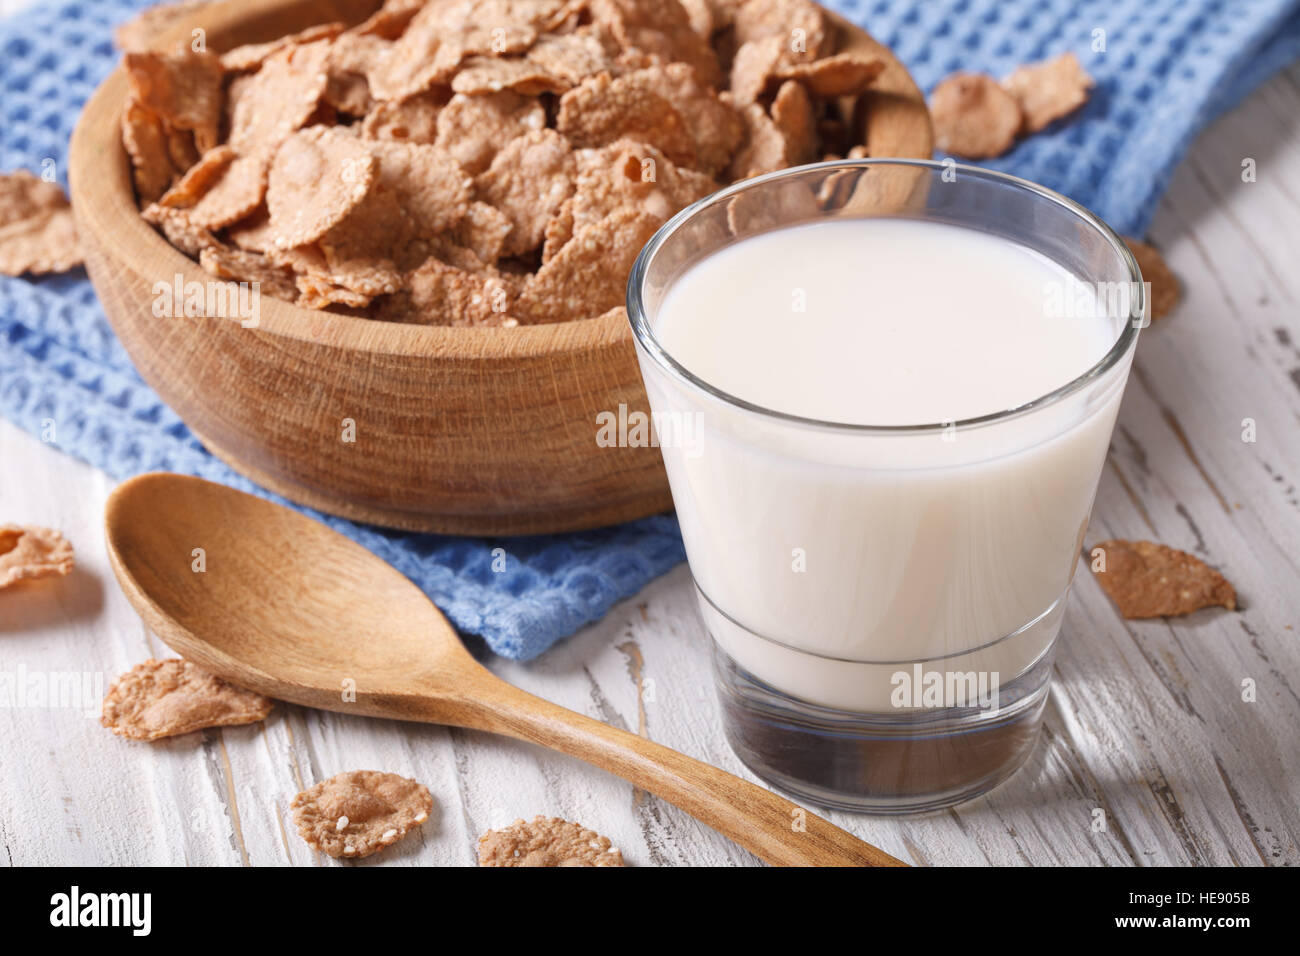 Fitness Breakfast: bran flakes in a wooden bowl and milk close-up. horizontal, rustic style Stock Photo